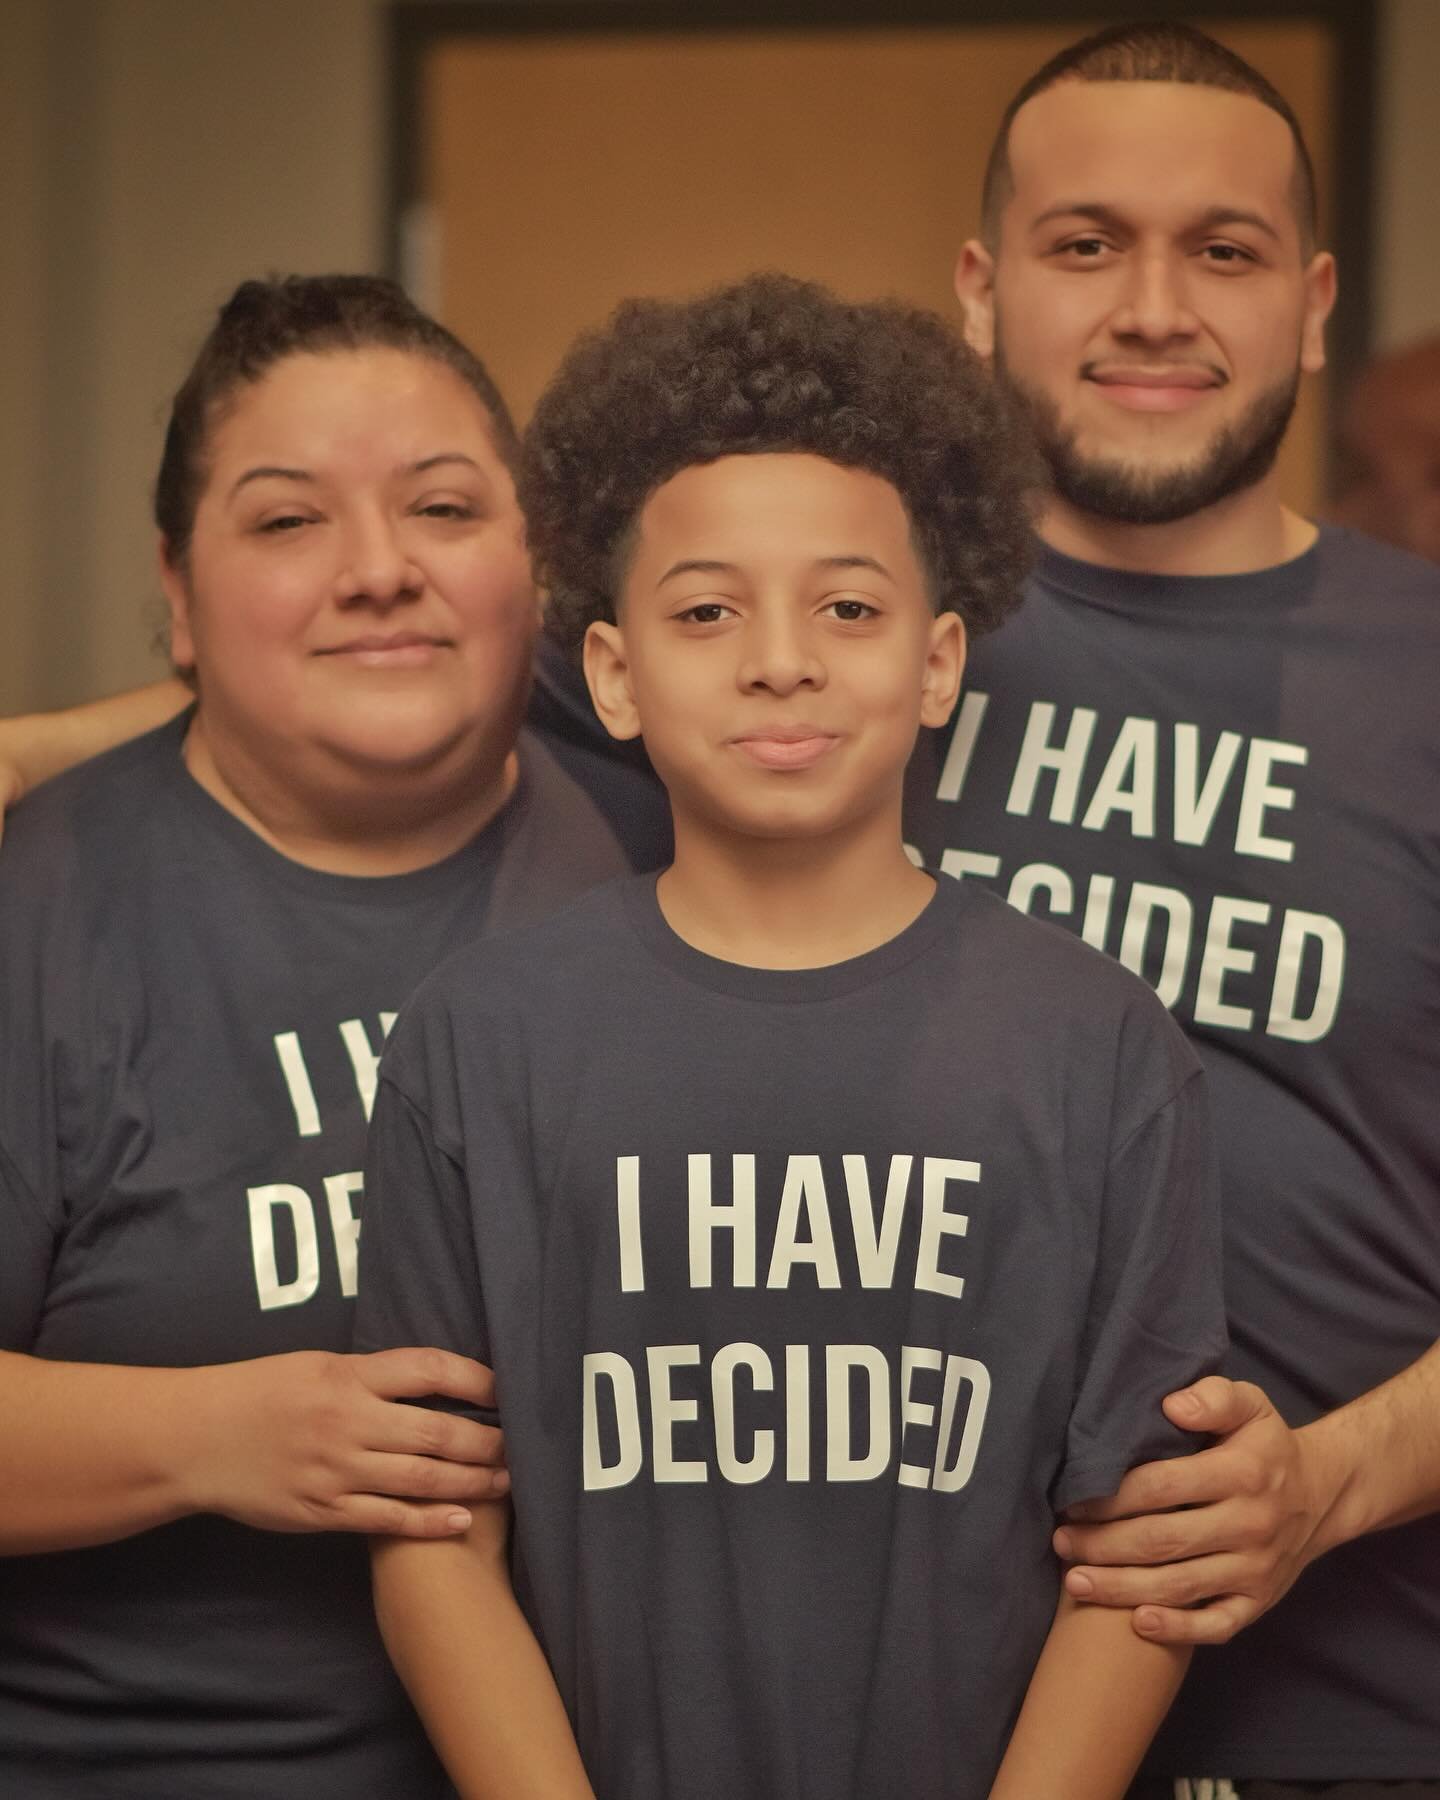 They have decide!! 🙌🏼

&rdquo;Whoever believes and is baptized will be saved.&ldquo;
‭‭Mark‬ ‭16‬:‭16‬ 

Baptism is an outward expression of what you have already decided in your heart- that you have given your life to Christ! If you are ready to m